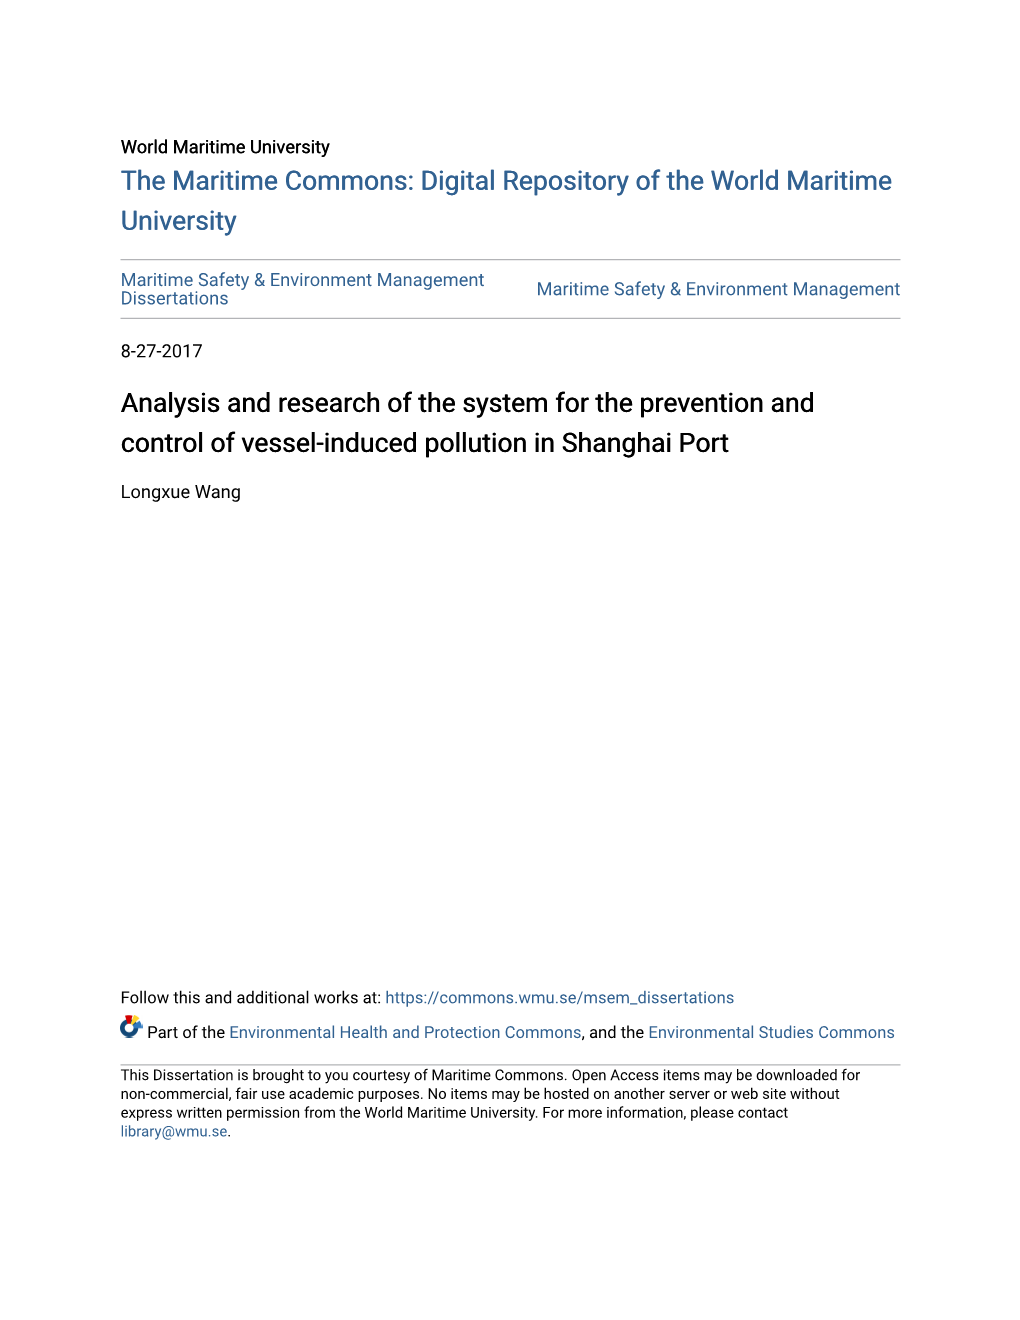 Analysis and Research of the System for the Prevention and Control of Vessel-Induced Pollution in Shanghai Port